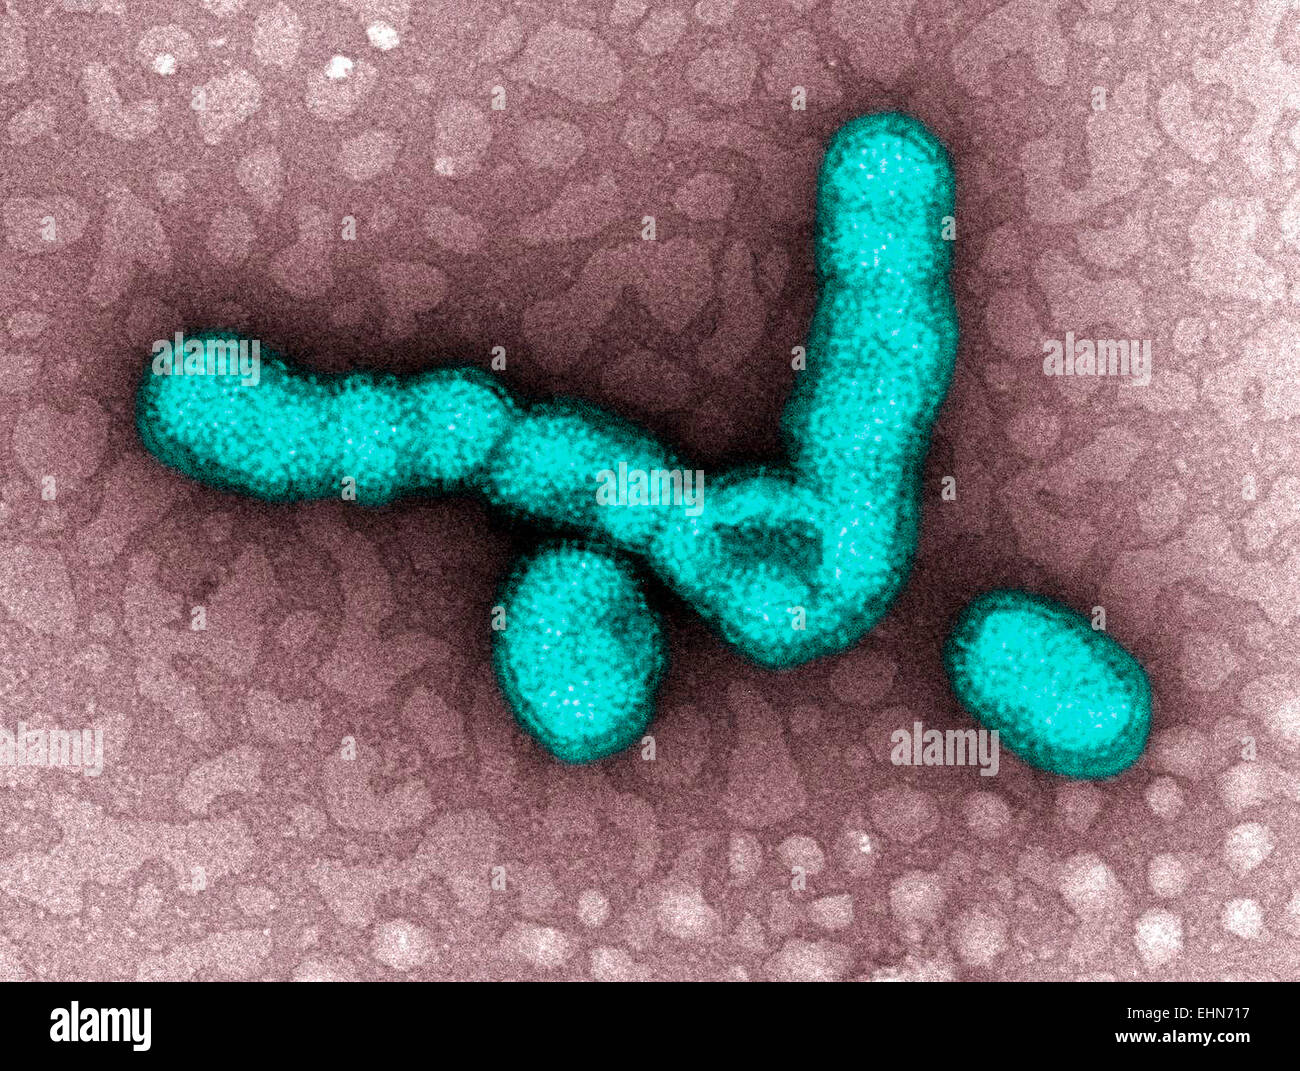 Transmission Electron Micrograph (TEM) depicts numbers of H1N1 influenza virus particles. Stock Photo